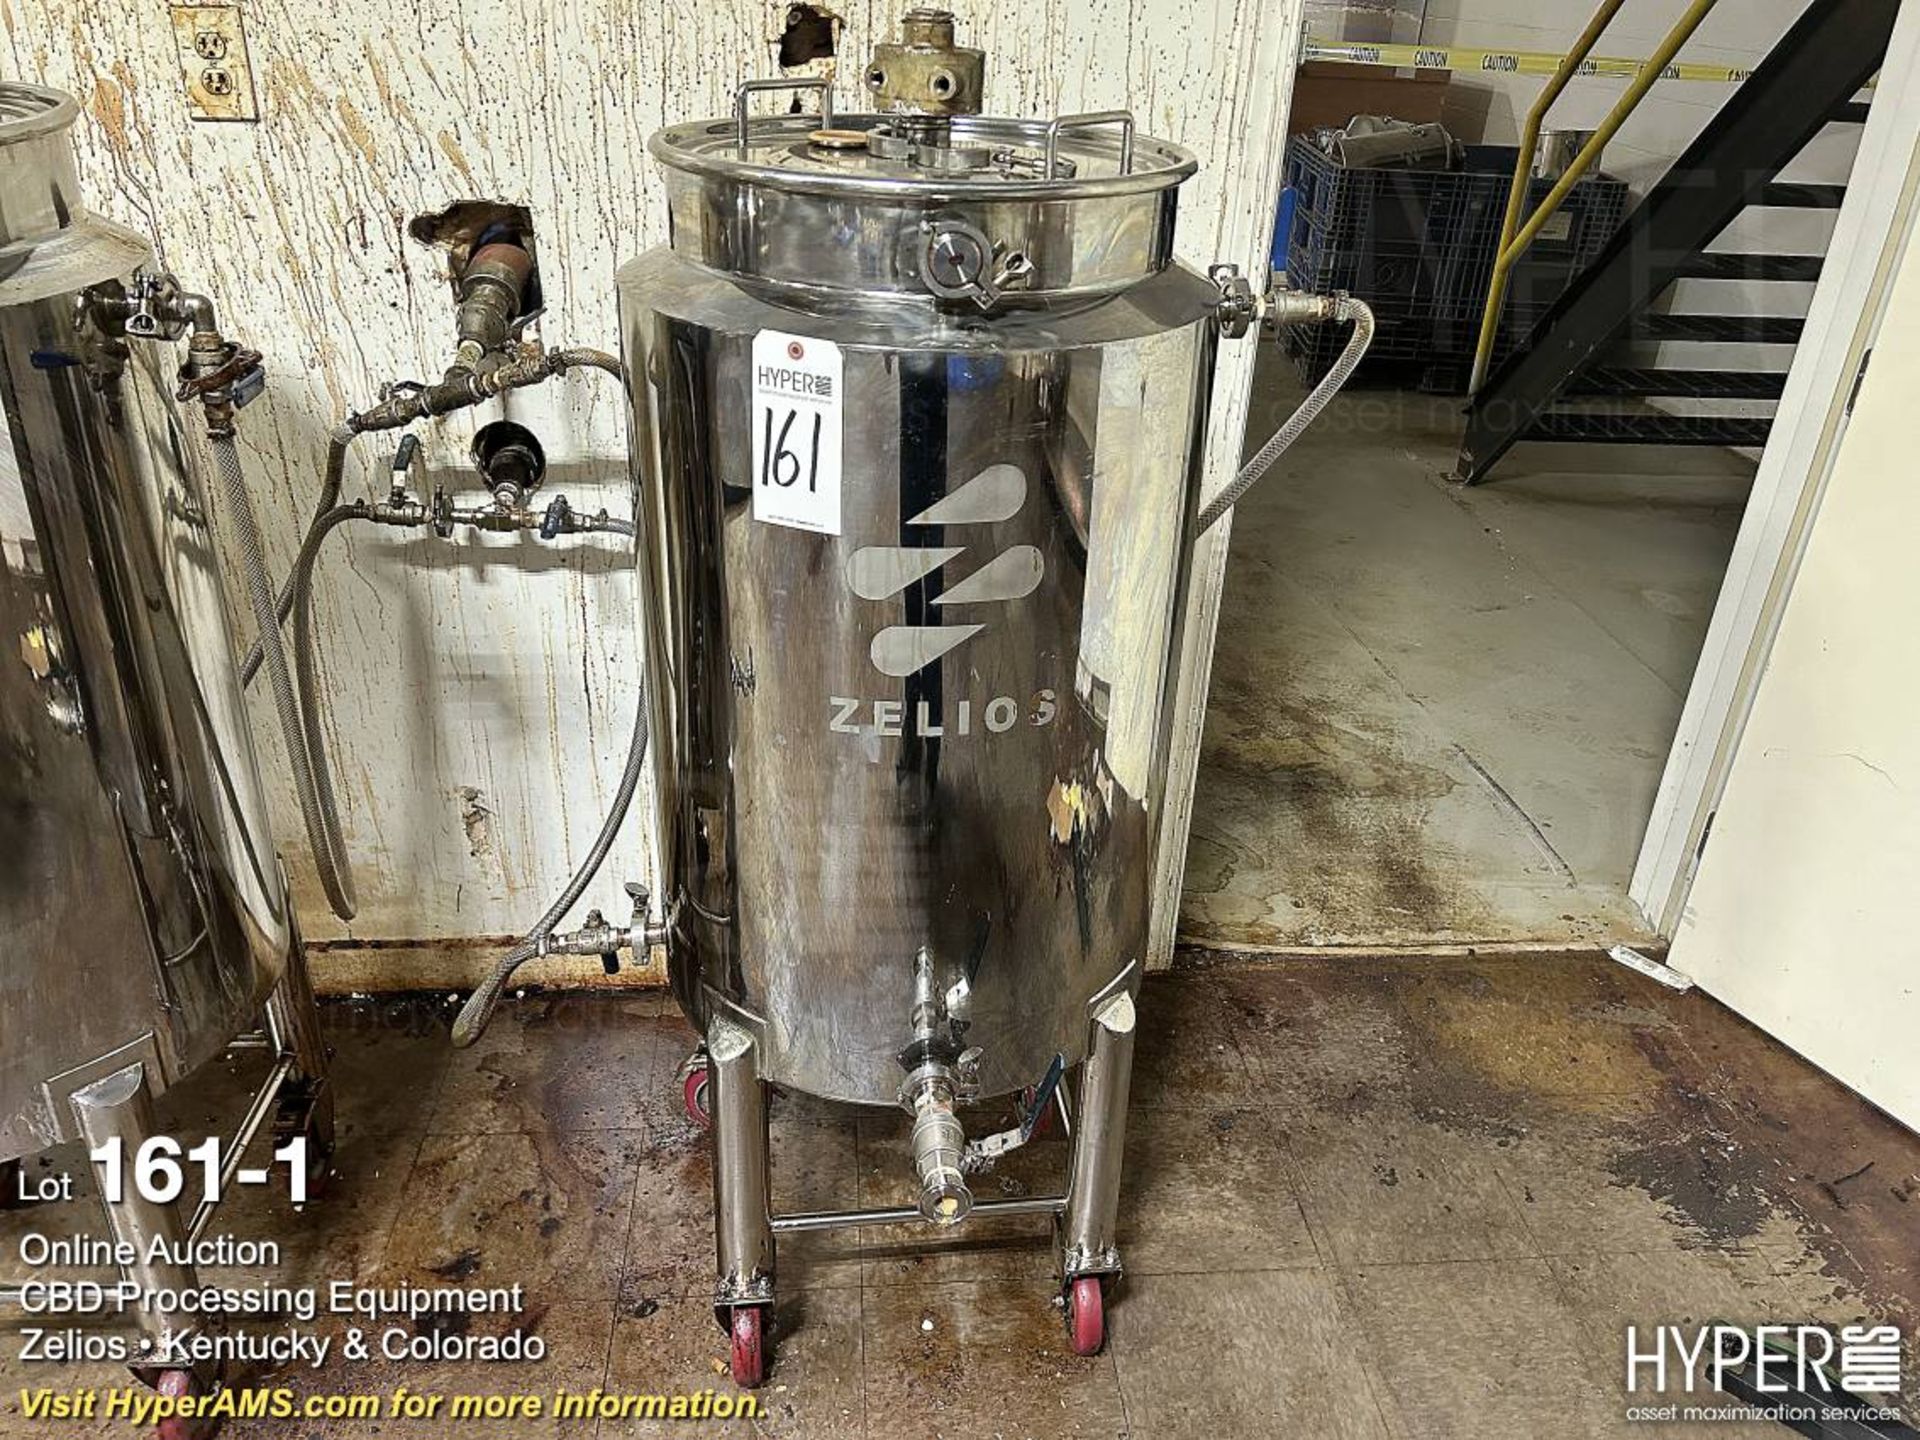 Approx. 30-Liter Stainless Steel Jacked Vessel